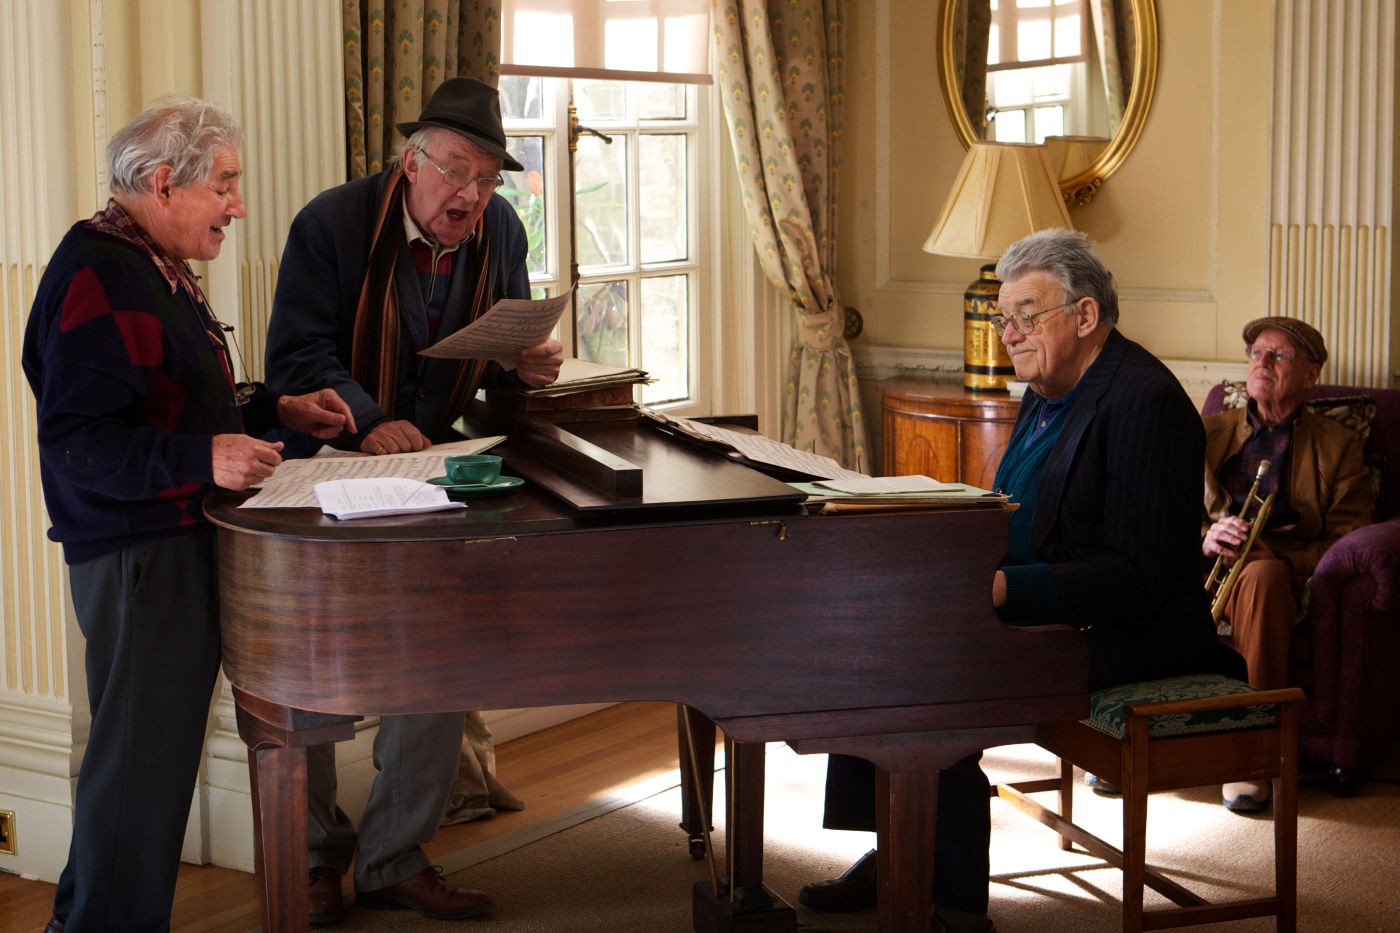 Ronnie Fox, David Ryall, Trevor Peacock and Michael Byrne in The Weinstein Company's Quartet (2013)